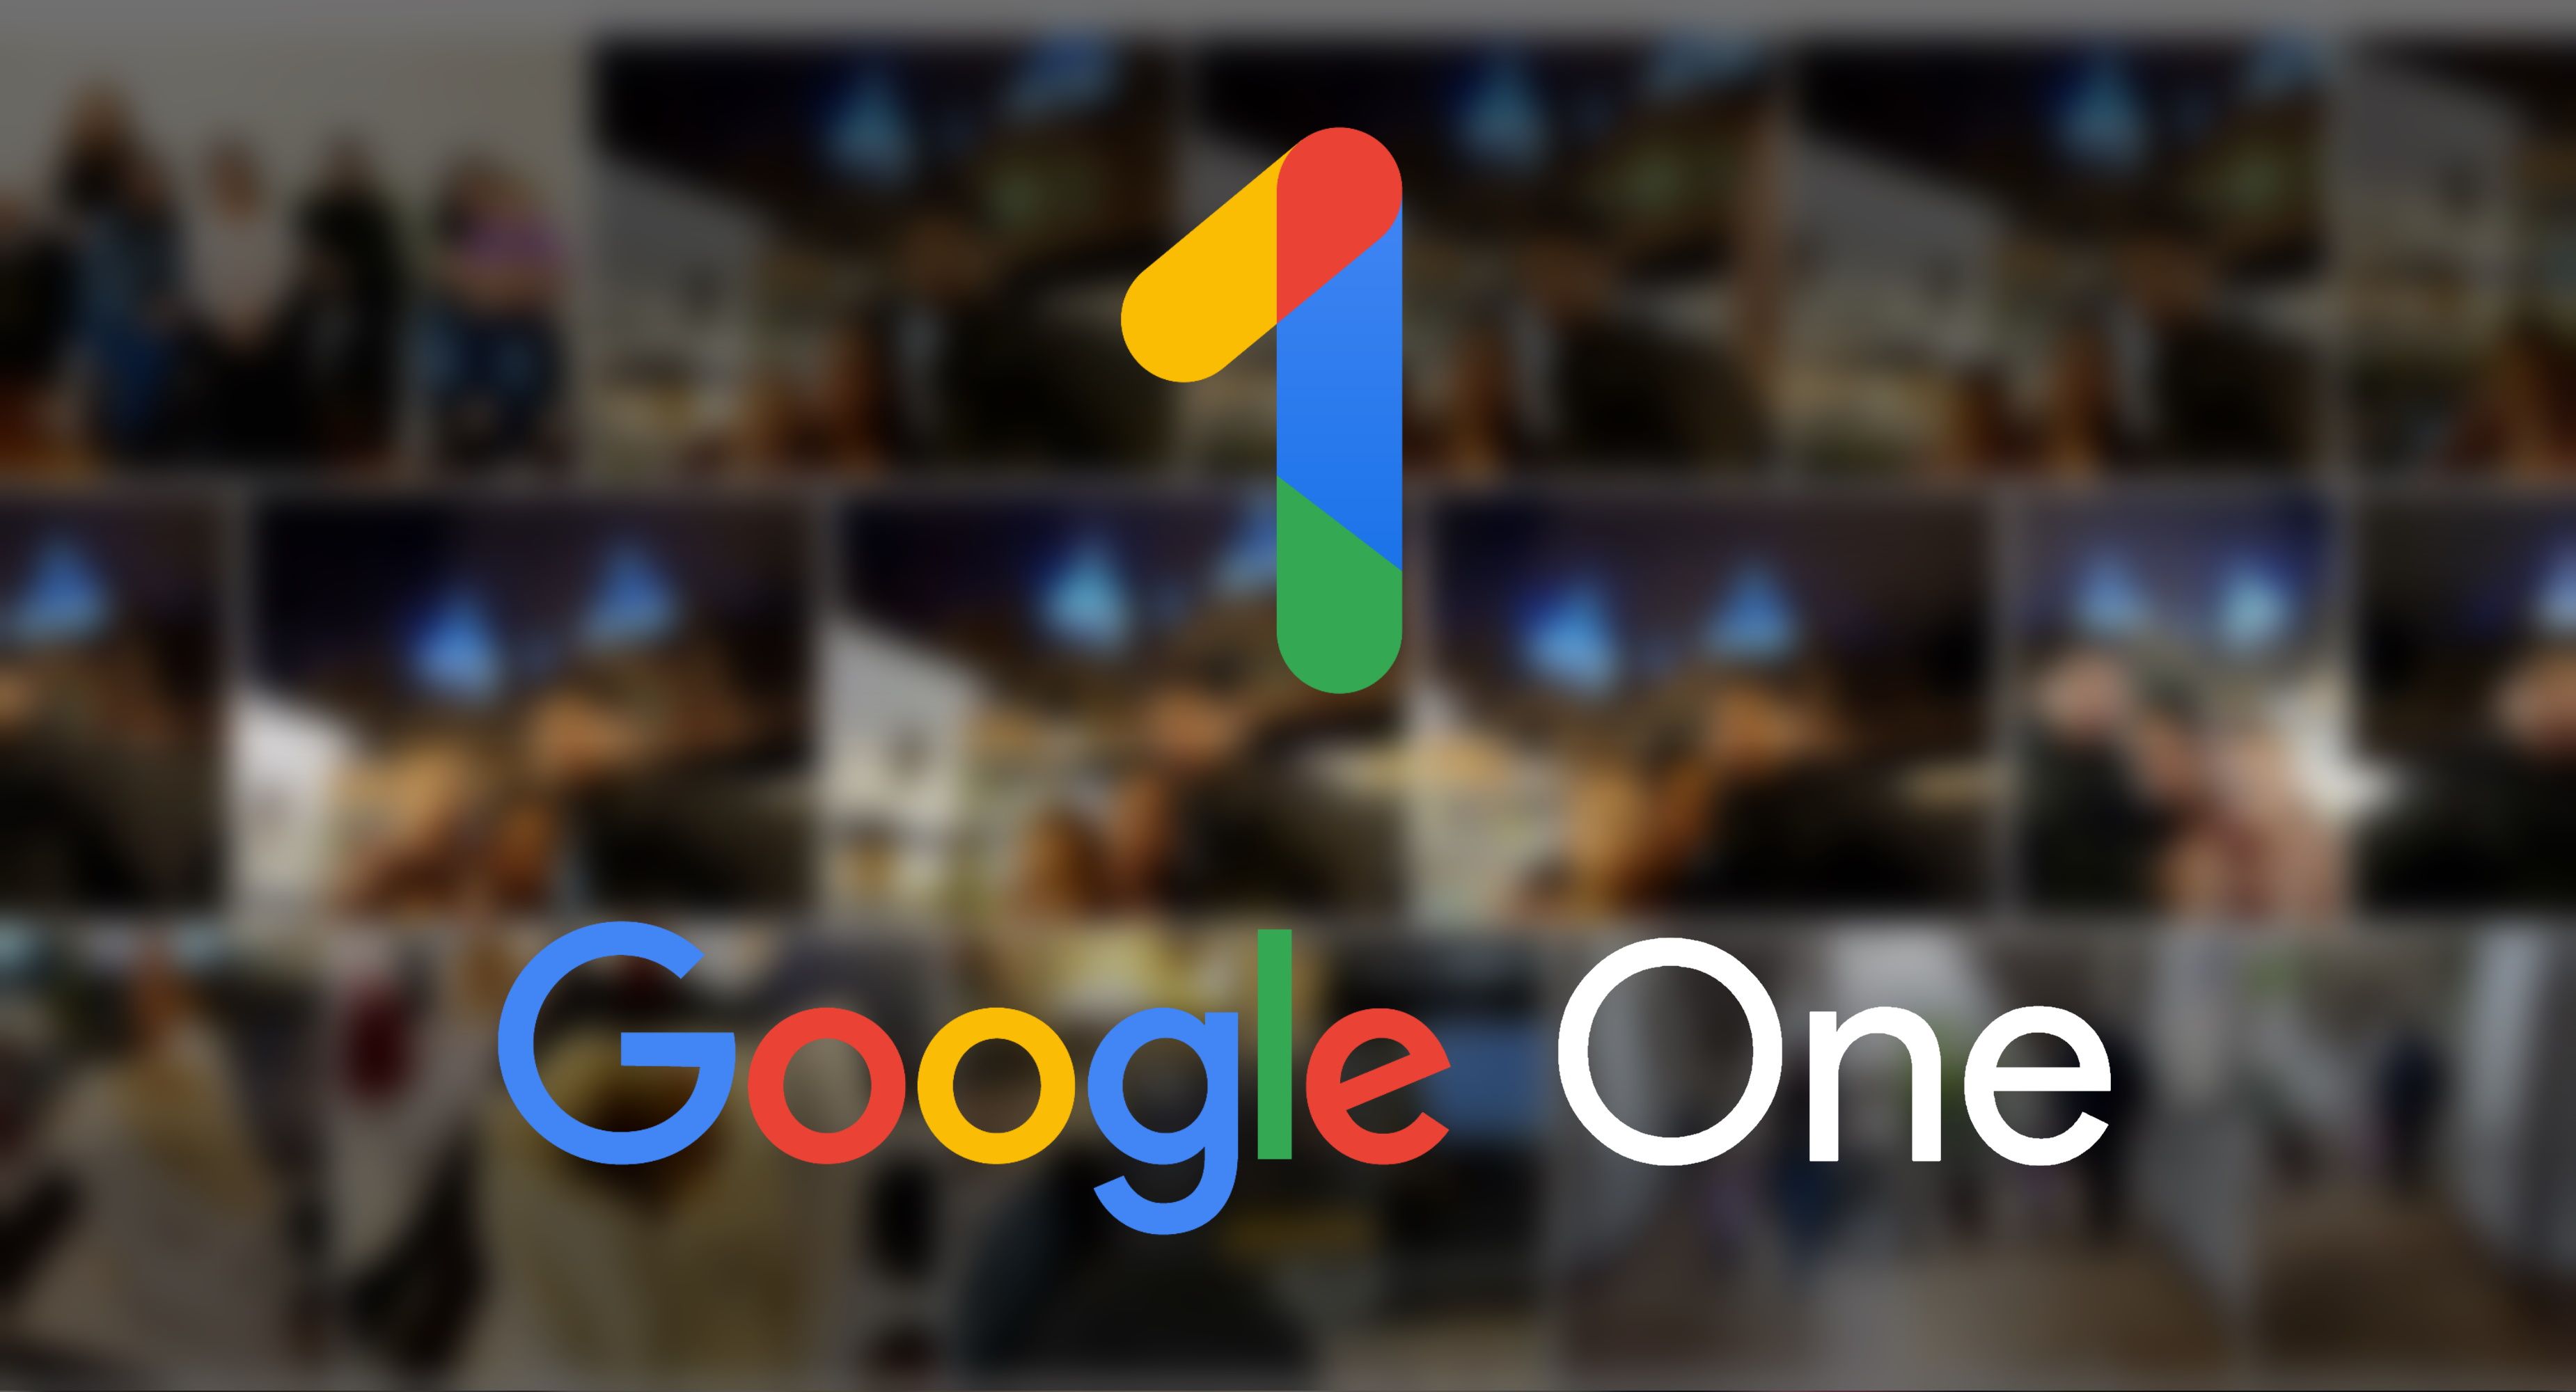 background of blurred google photos backups with the google one logo and script in the foreground